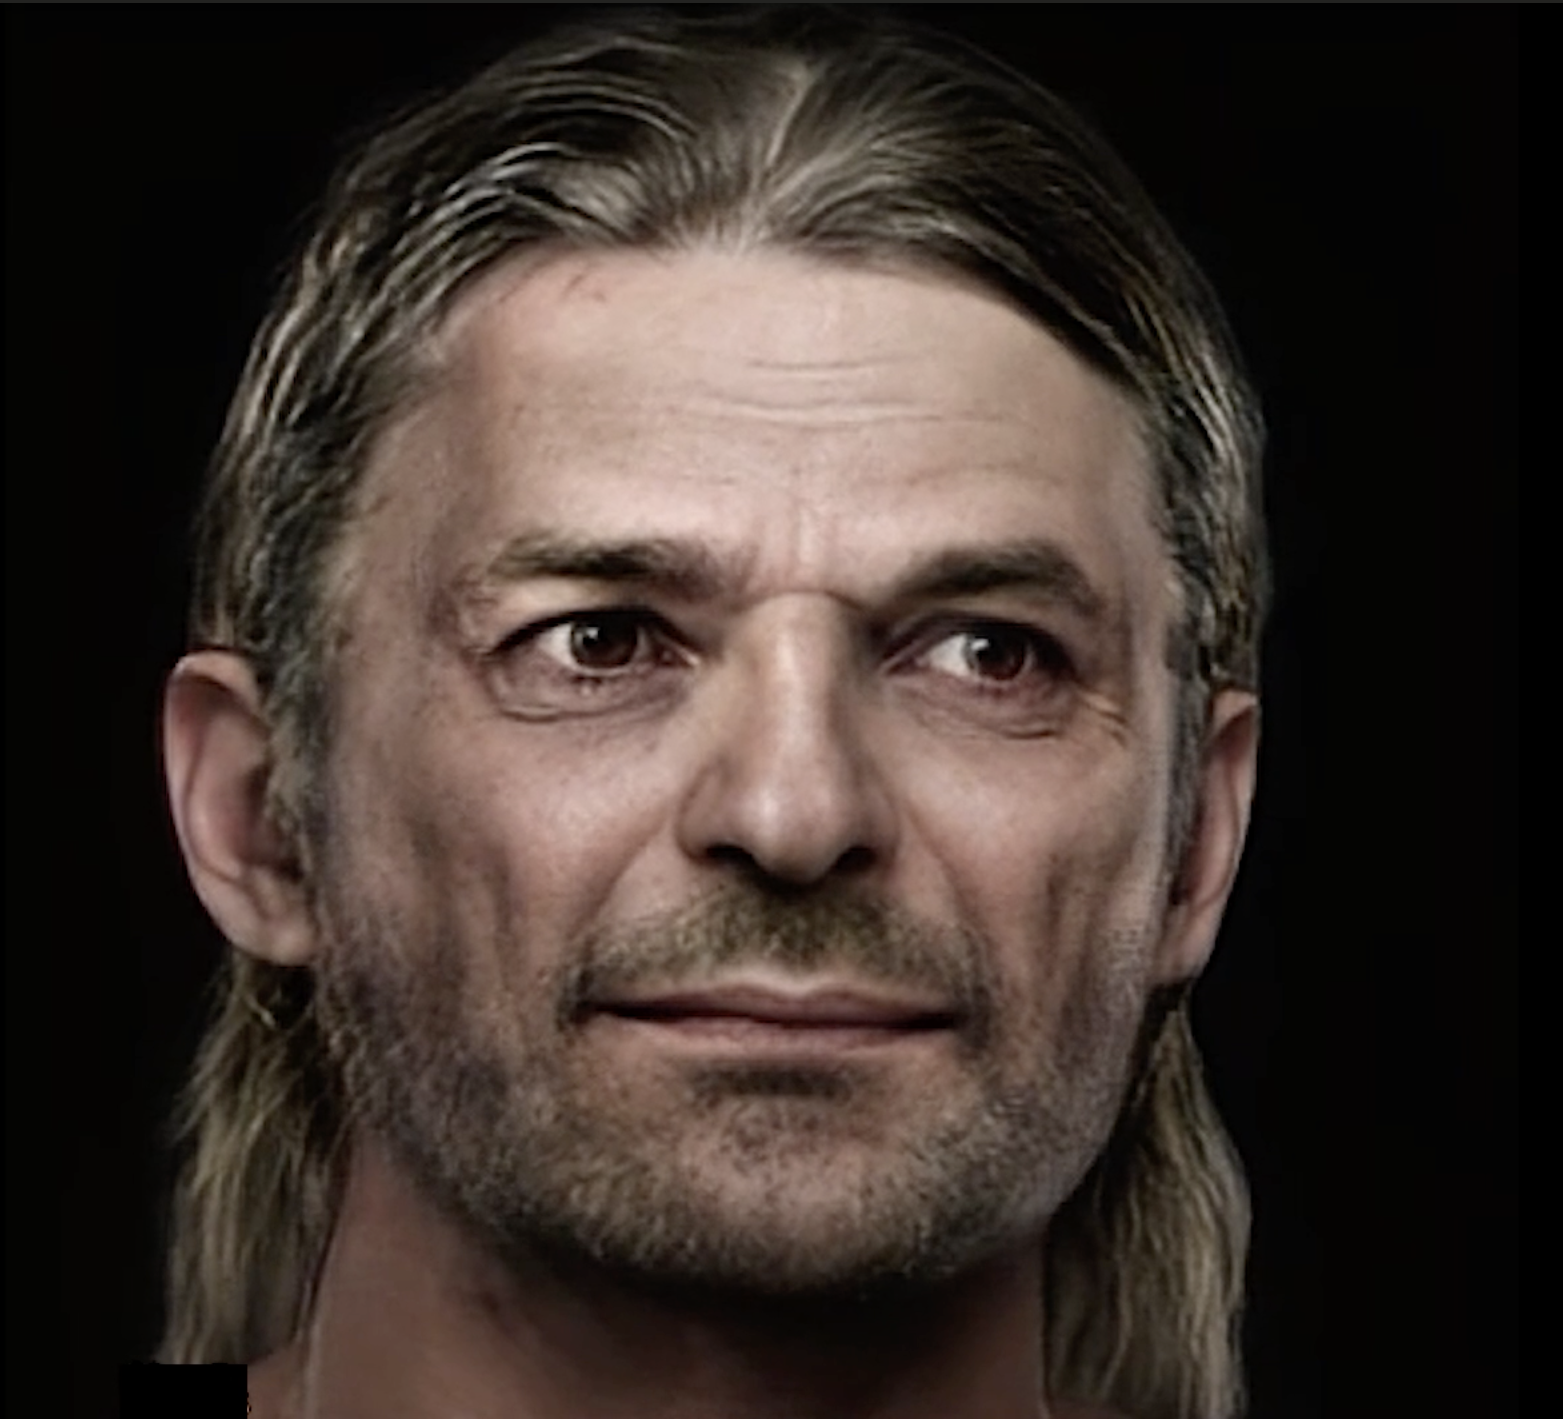 Digital facial reconstruction based on remains of Late Iron AgePictish male, who lived 400-600 AD, found at Bridge of Tilt, Blair Atholl. Copyright Perth Museum, Culture Perth and Kinross, working with Chris Rynn, 2024.